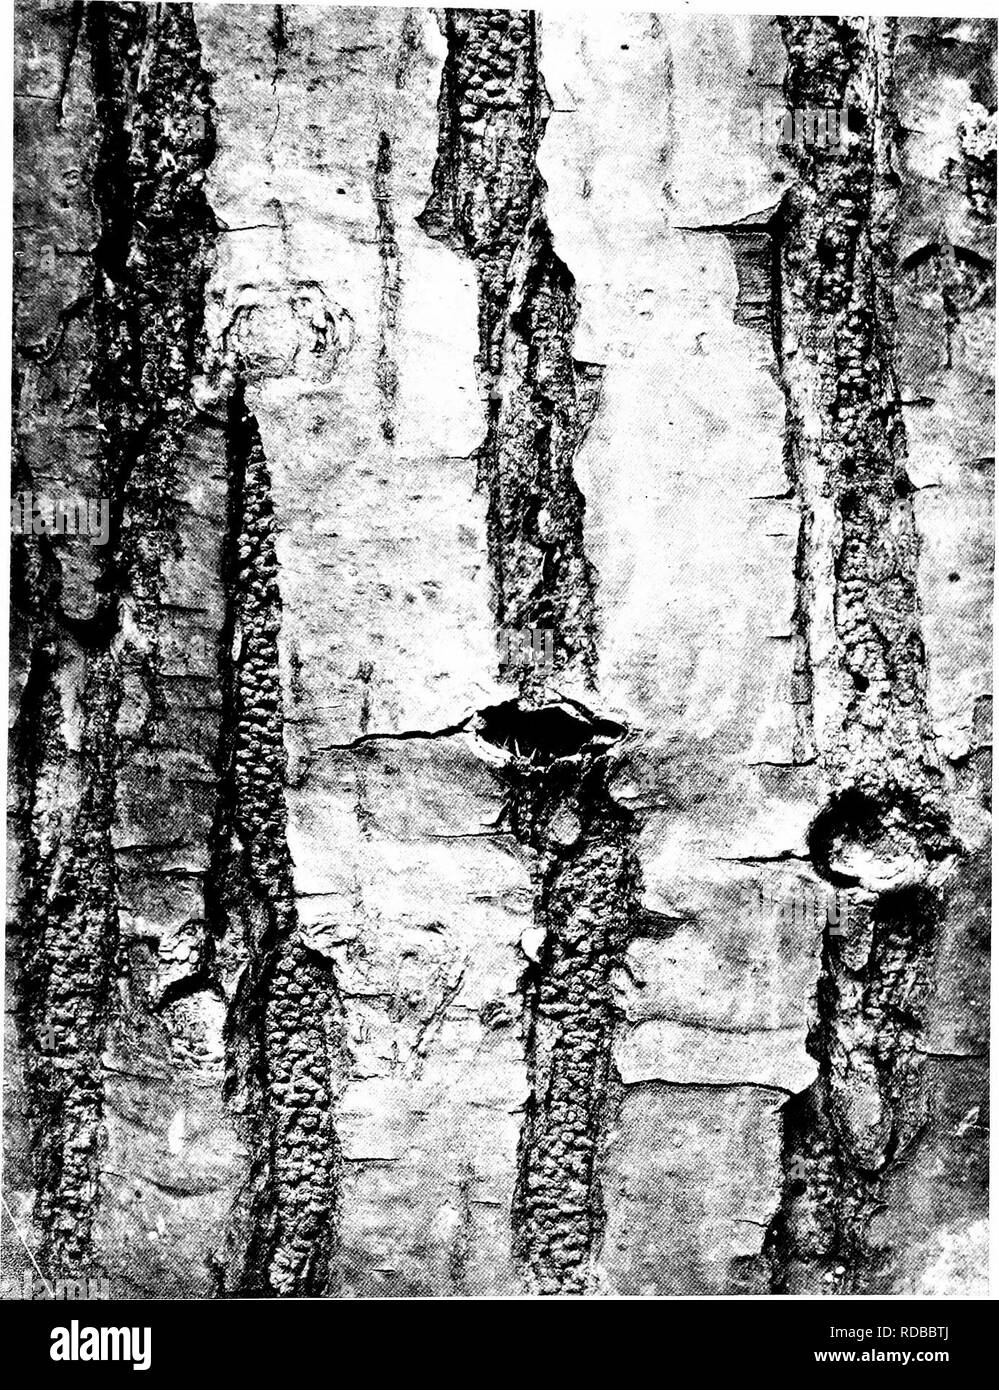 . Chestnut blight. Chestnut blight; Chestnut. PUSTULKS m CRACKS OF BARK. When the pustule attacks a large limb or the trunk, there is Httle obvious change in the external appearance of the bark itself, but the pustules show in the cracks of the bark, as can be clearly seen in this photograph. The bark often sounds hollow when tapped. The fungus continues to grow after the trunk is girdled, sometimes covering the entire surface with reddish-brown pustules, which produce the t5'pe of spores called ascospores. (Figure 7.) 15. Please note that these images are extracted from scanned page images th Stock Photo